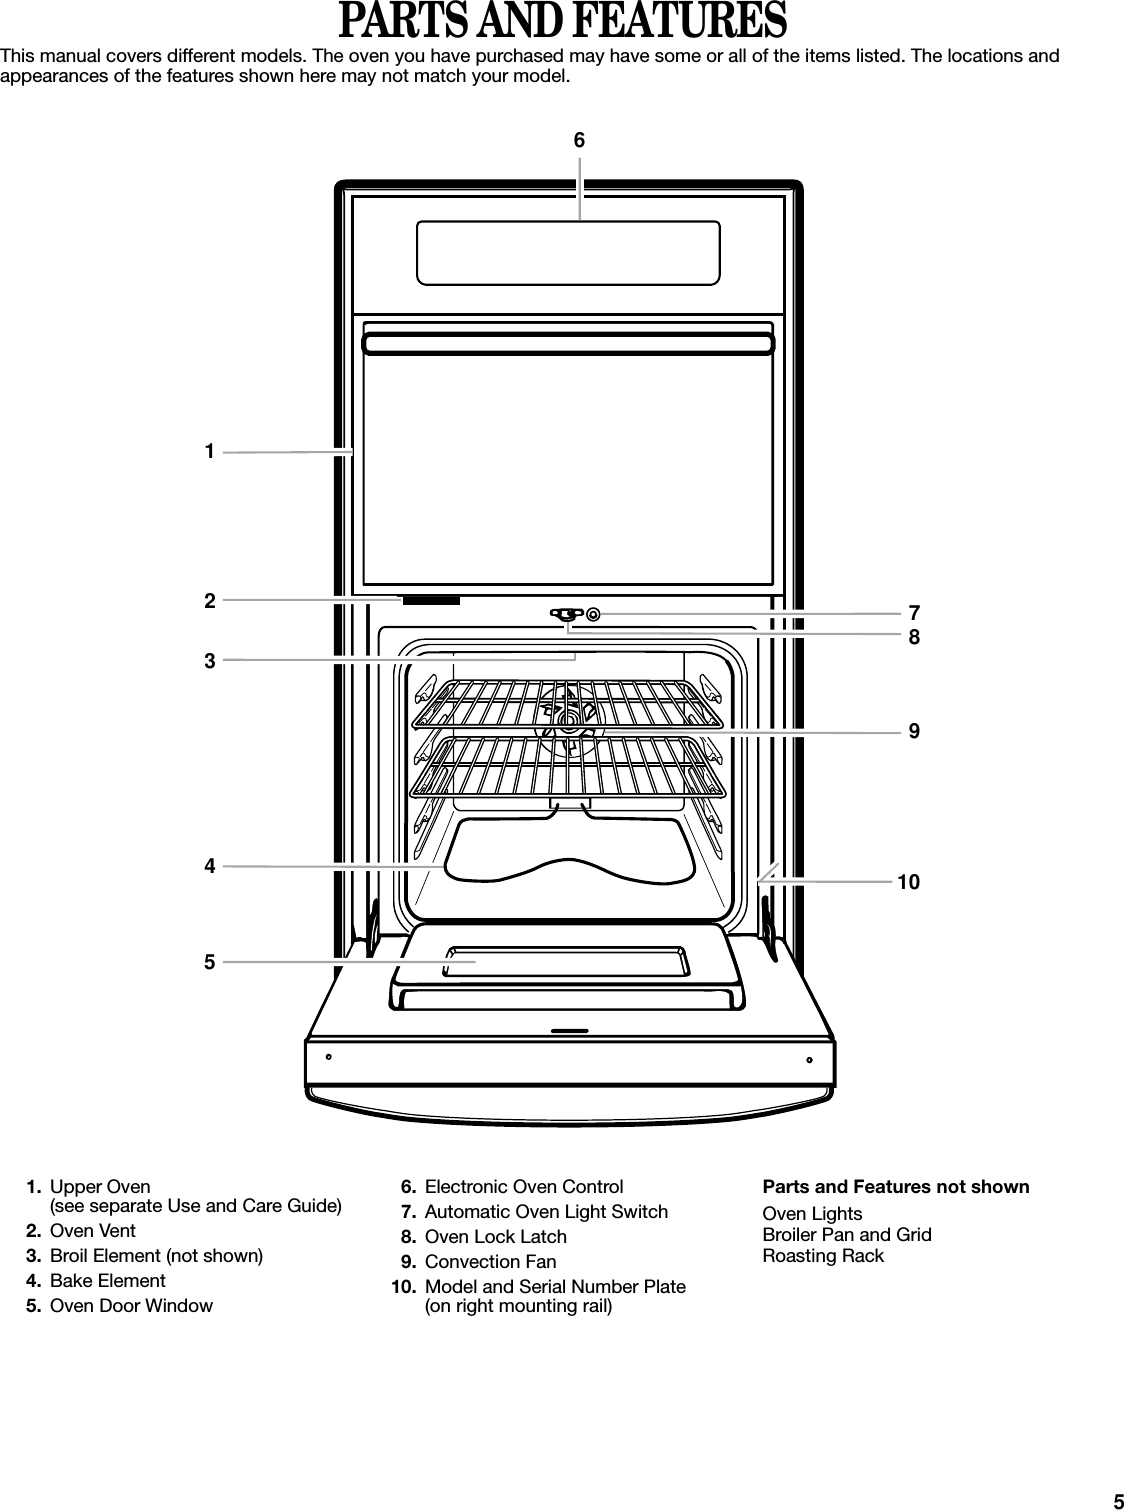 5PARTS AND FEATURESThis manual covers different models. The oven you have purchased may have some or all of the items listed. The locations and appearances of the features shown here may not match your model.1. Upper Oven(see separate Use and Care Guide) 2. Oven Vent3. Broil Element (not shown)4. Bake Element5. Oven Door Window6. Electronic Oven Control7. Automatic Oven Light Switch8. Oven Lock Latch9. Convection Fan10. Model and Serial Number Plate(on right mounting rail)Parts and Features not shownOven LightsBroiler Pan and GridRoasting Rack62341578109